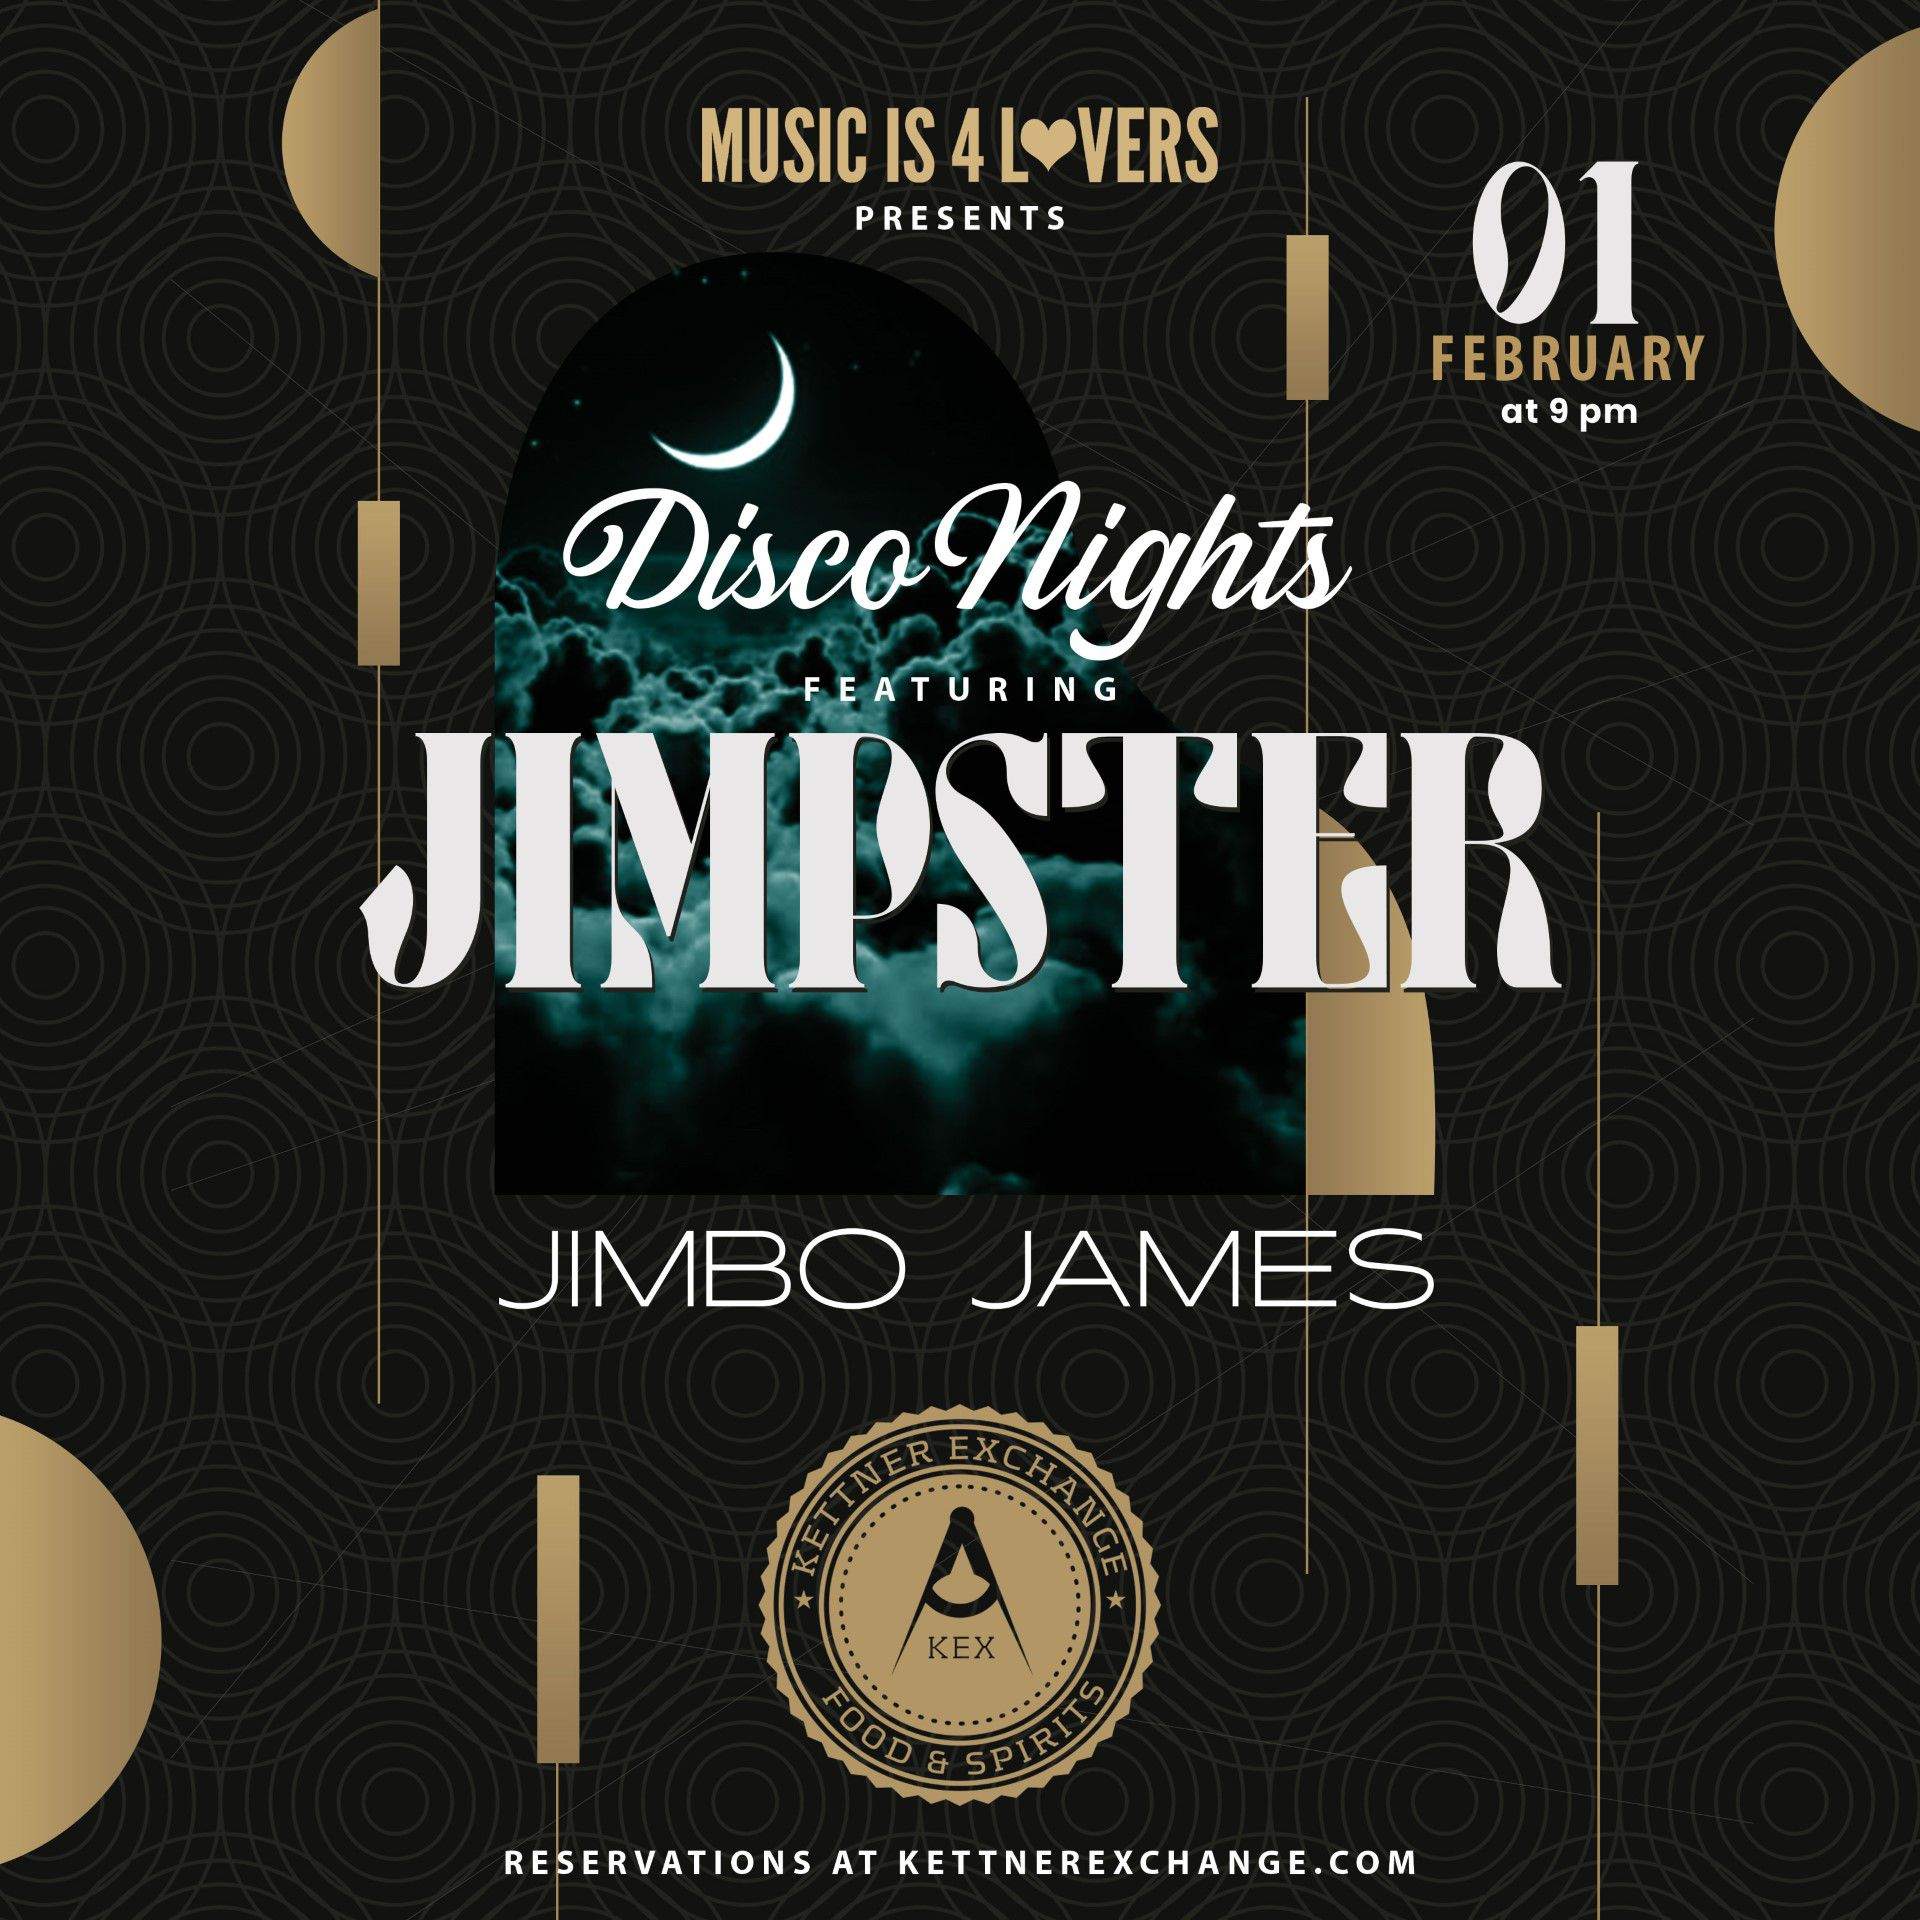 DISCO NIGHTS - Jimpster at Kettner Exchange - NO COVER - フライヤー表